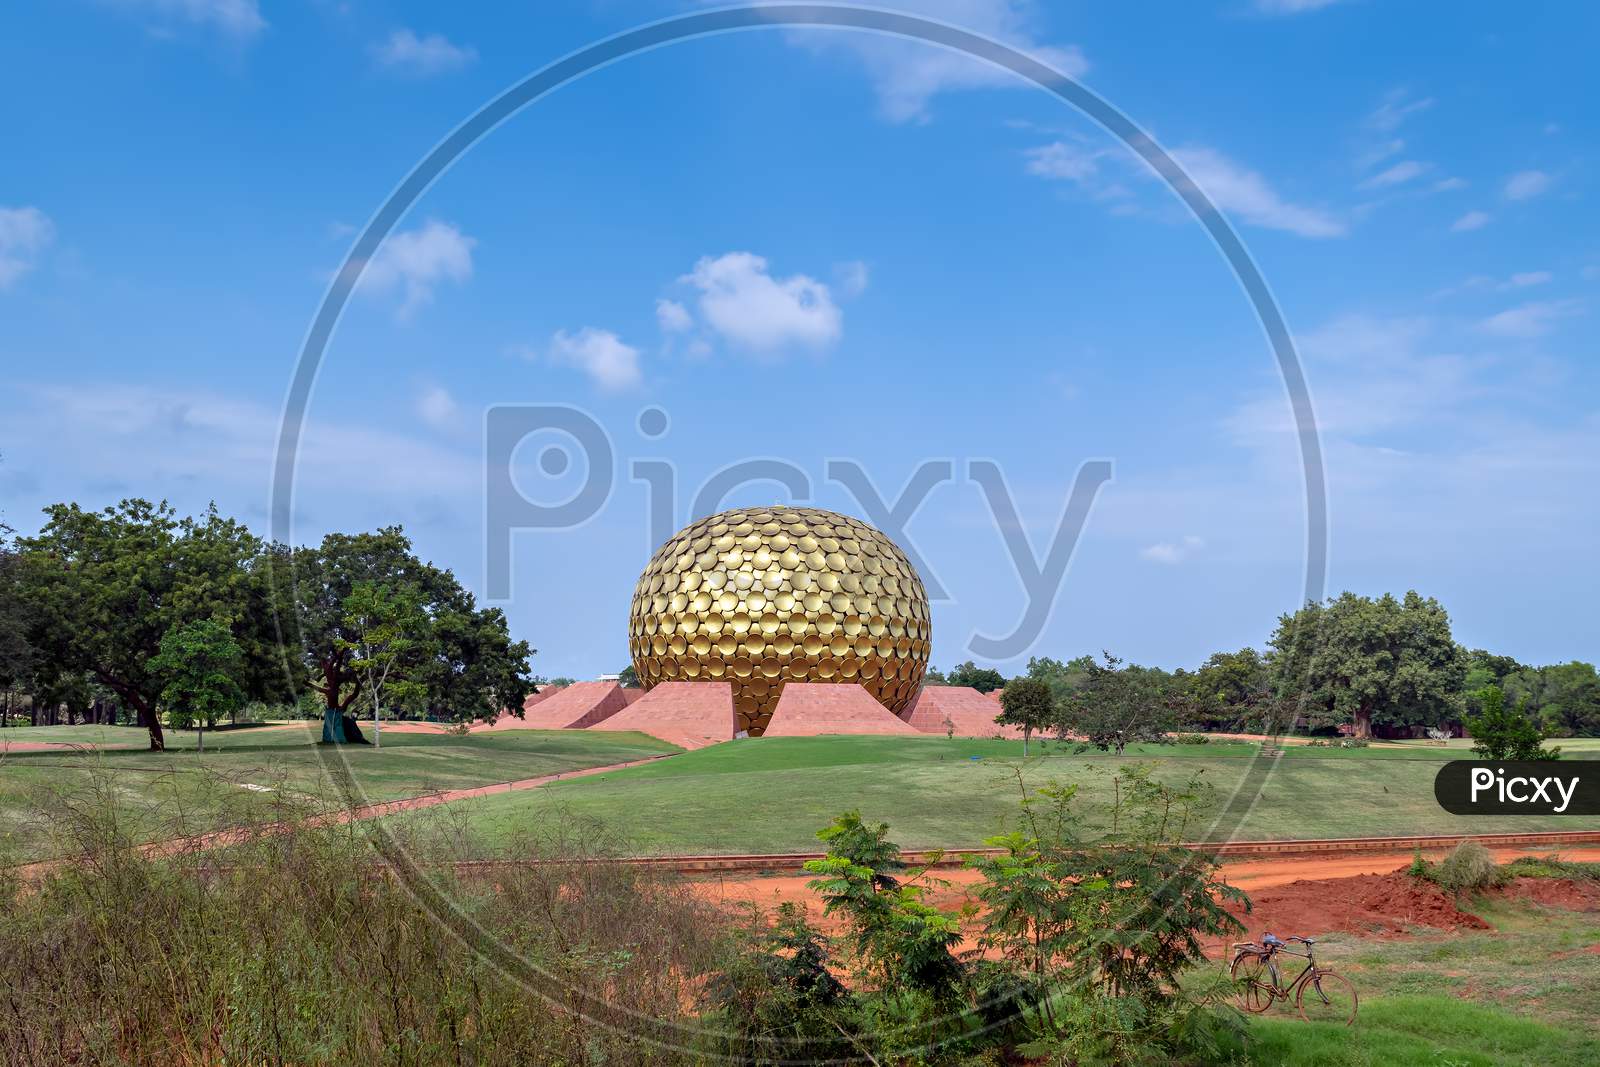 Golden Dome Of Matrimandir-An Edifice Of Spiritual Significance For Practitioners Of Integral Yoga.